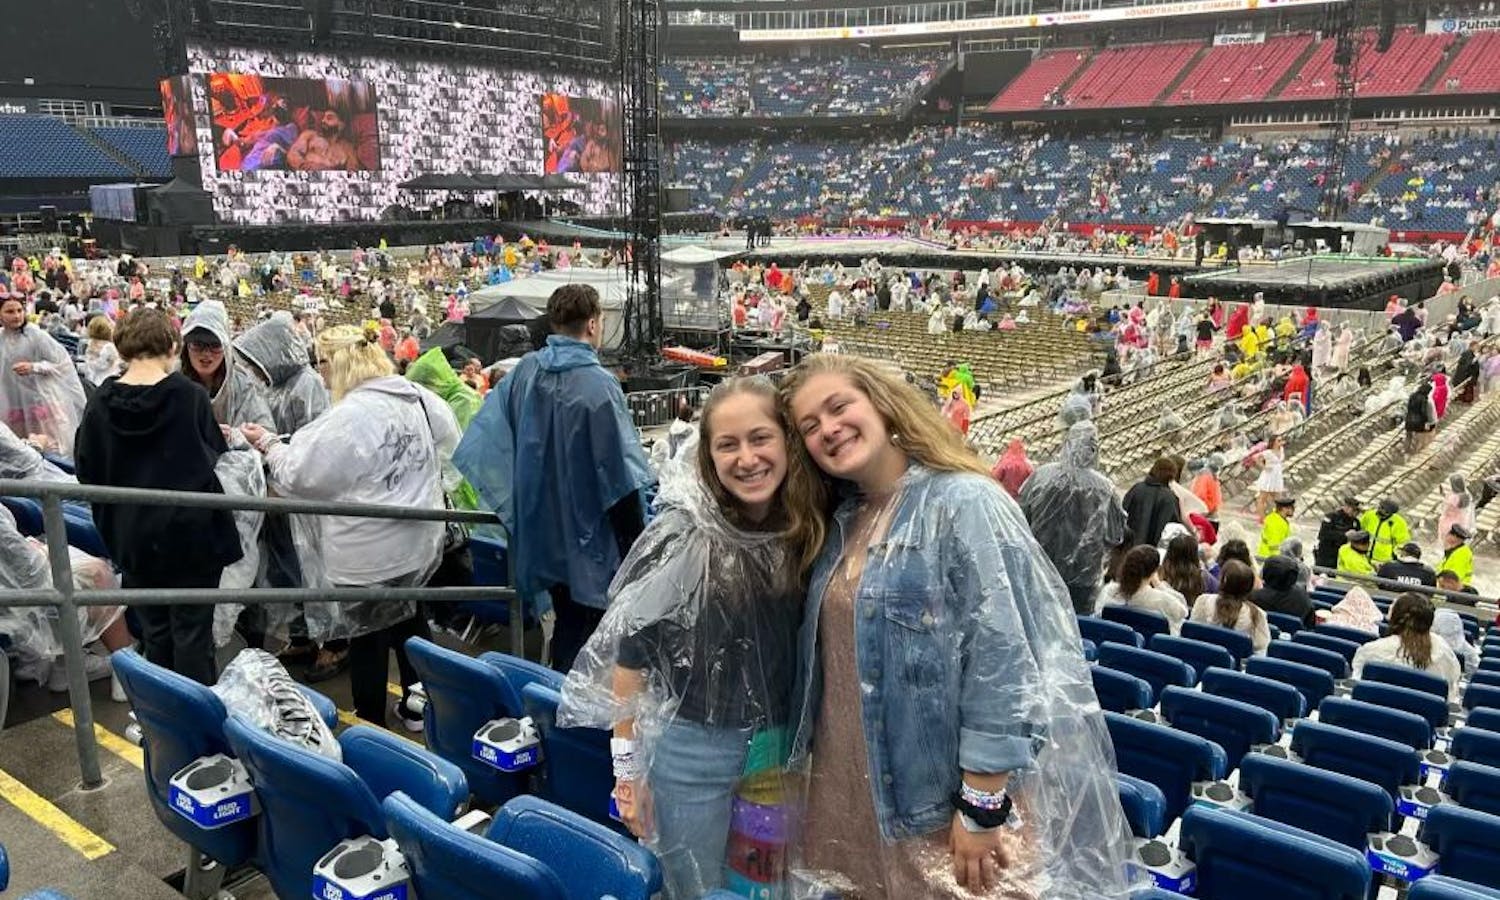 Hannah Friedman and her sister pictured at "The Eras Tour"